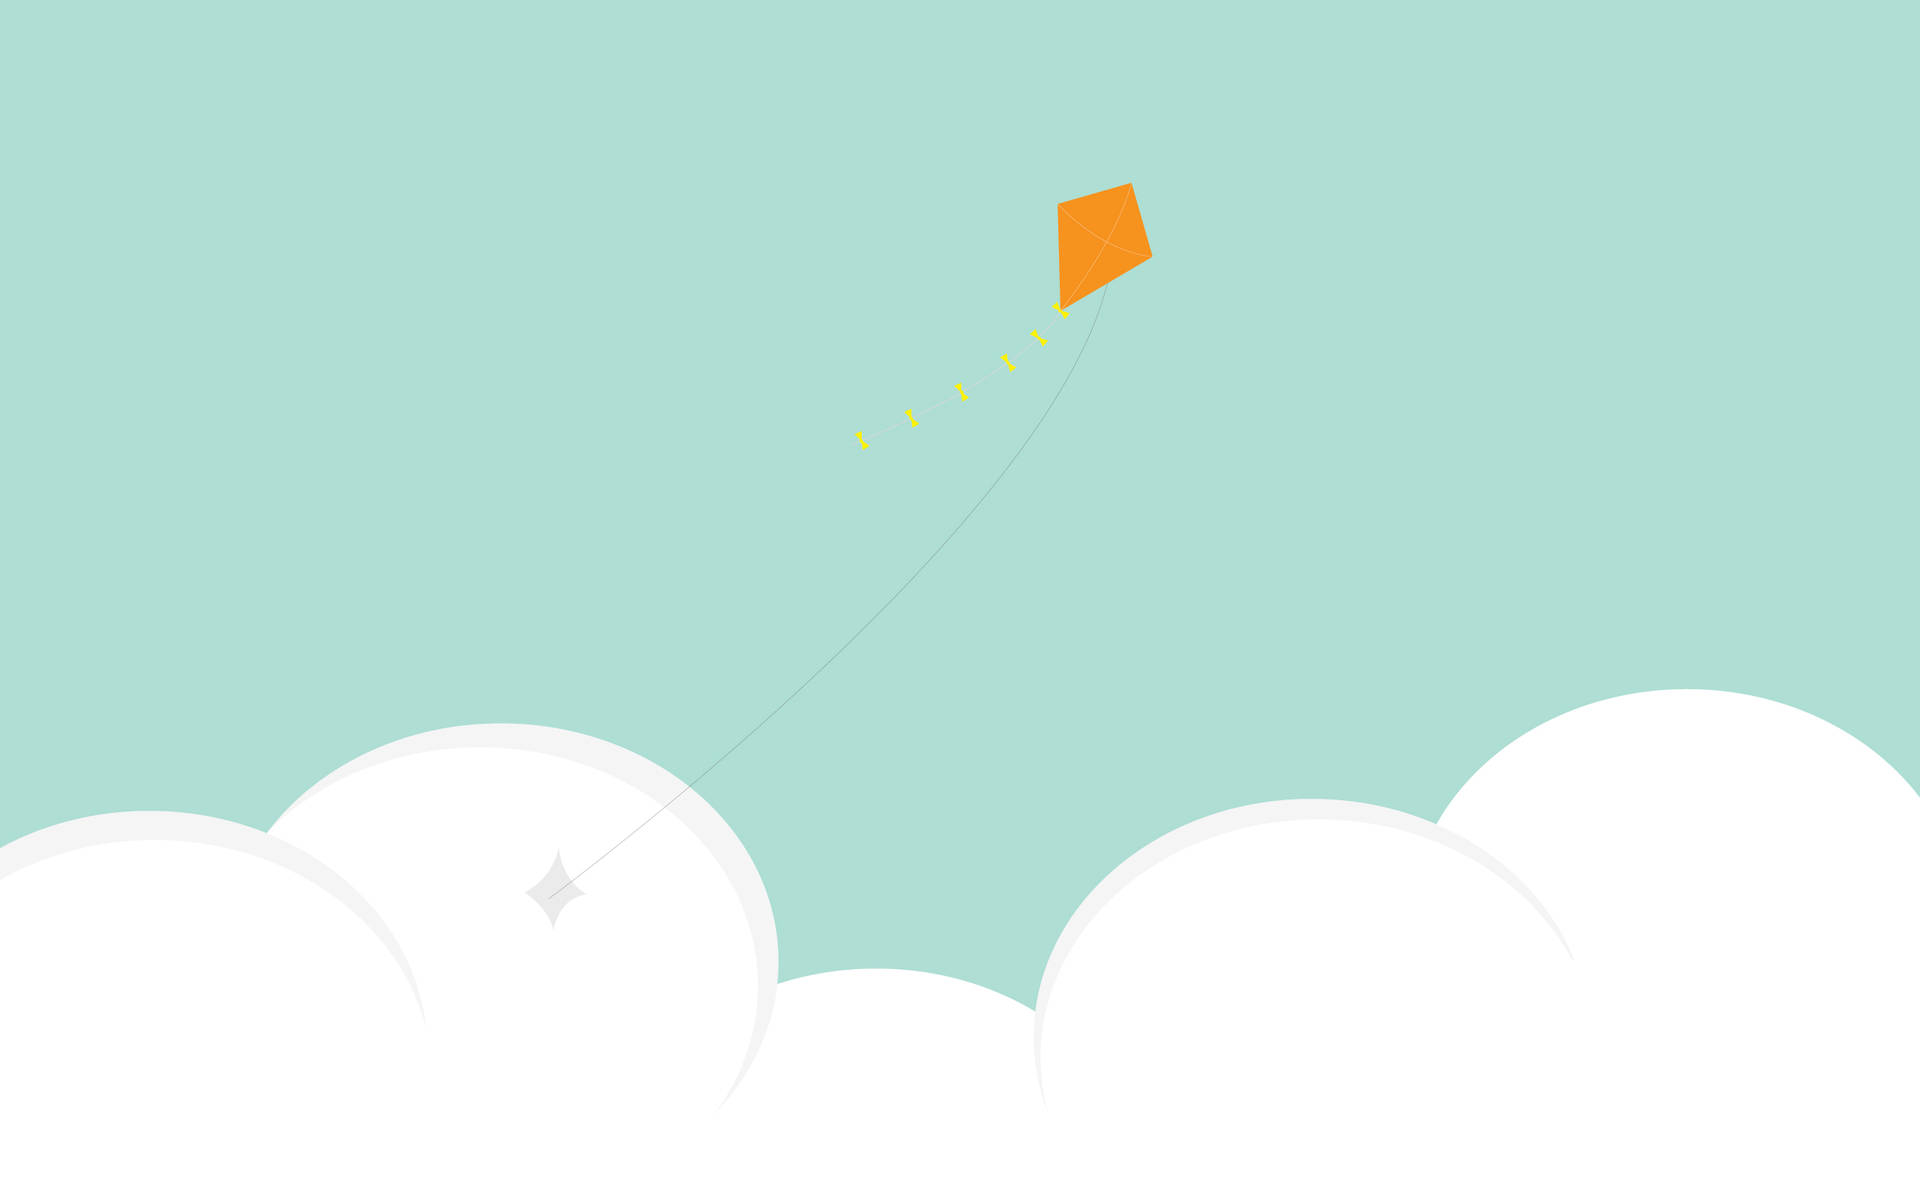 Bright And Whimsical Design Featuring A Kite In A Background Of White Fluffy Clouds Background